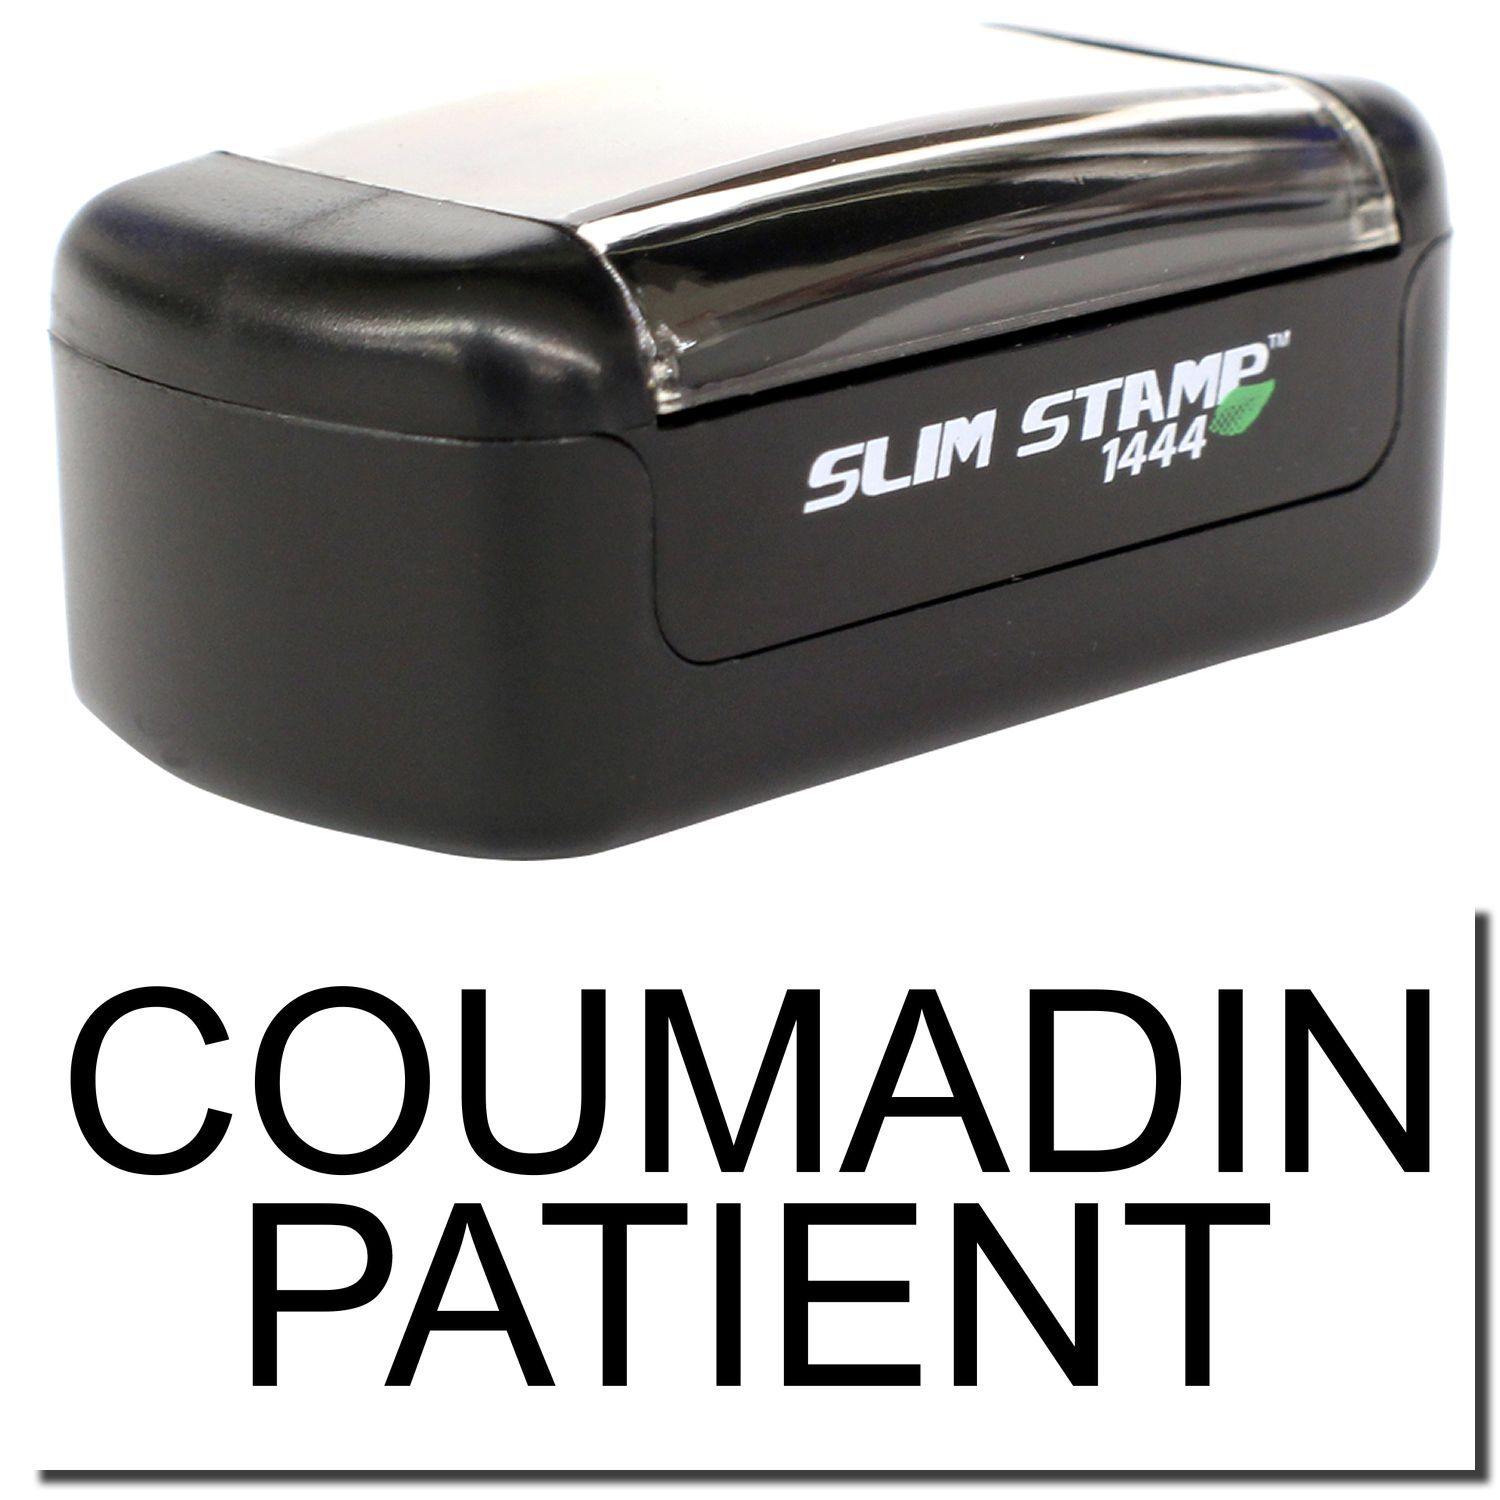 A stock office pre-inked stamp with a stamped image showing how the text "COUMADIN PATIENT" is displayed after stamping.